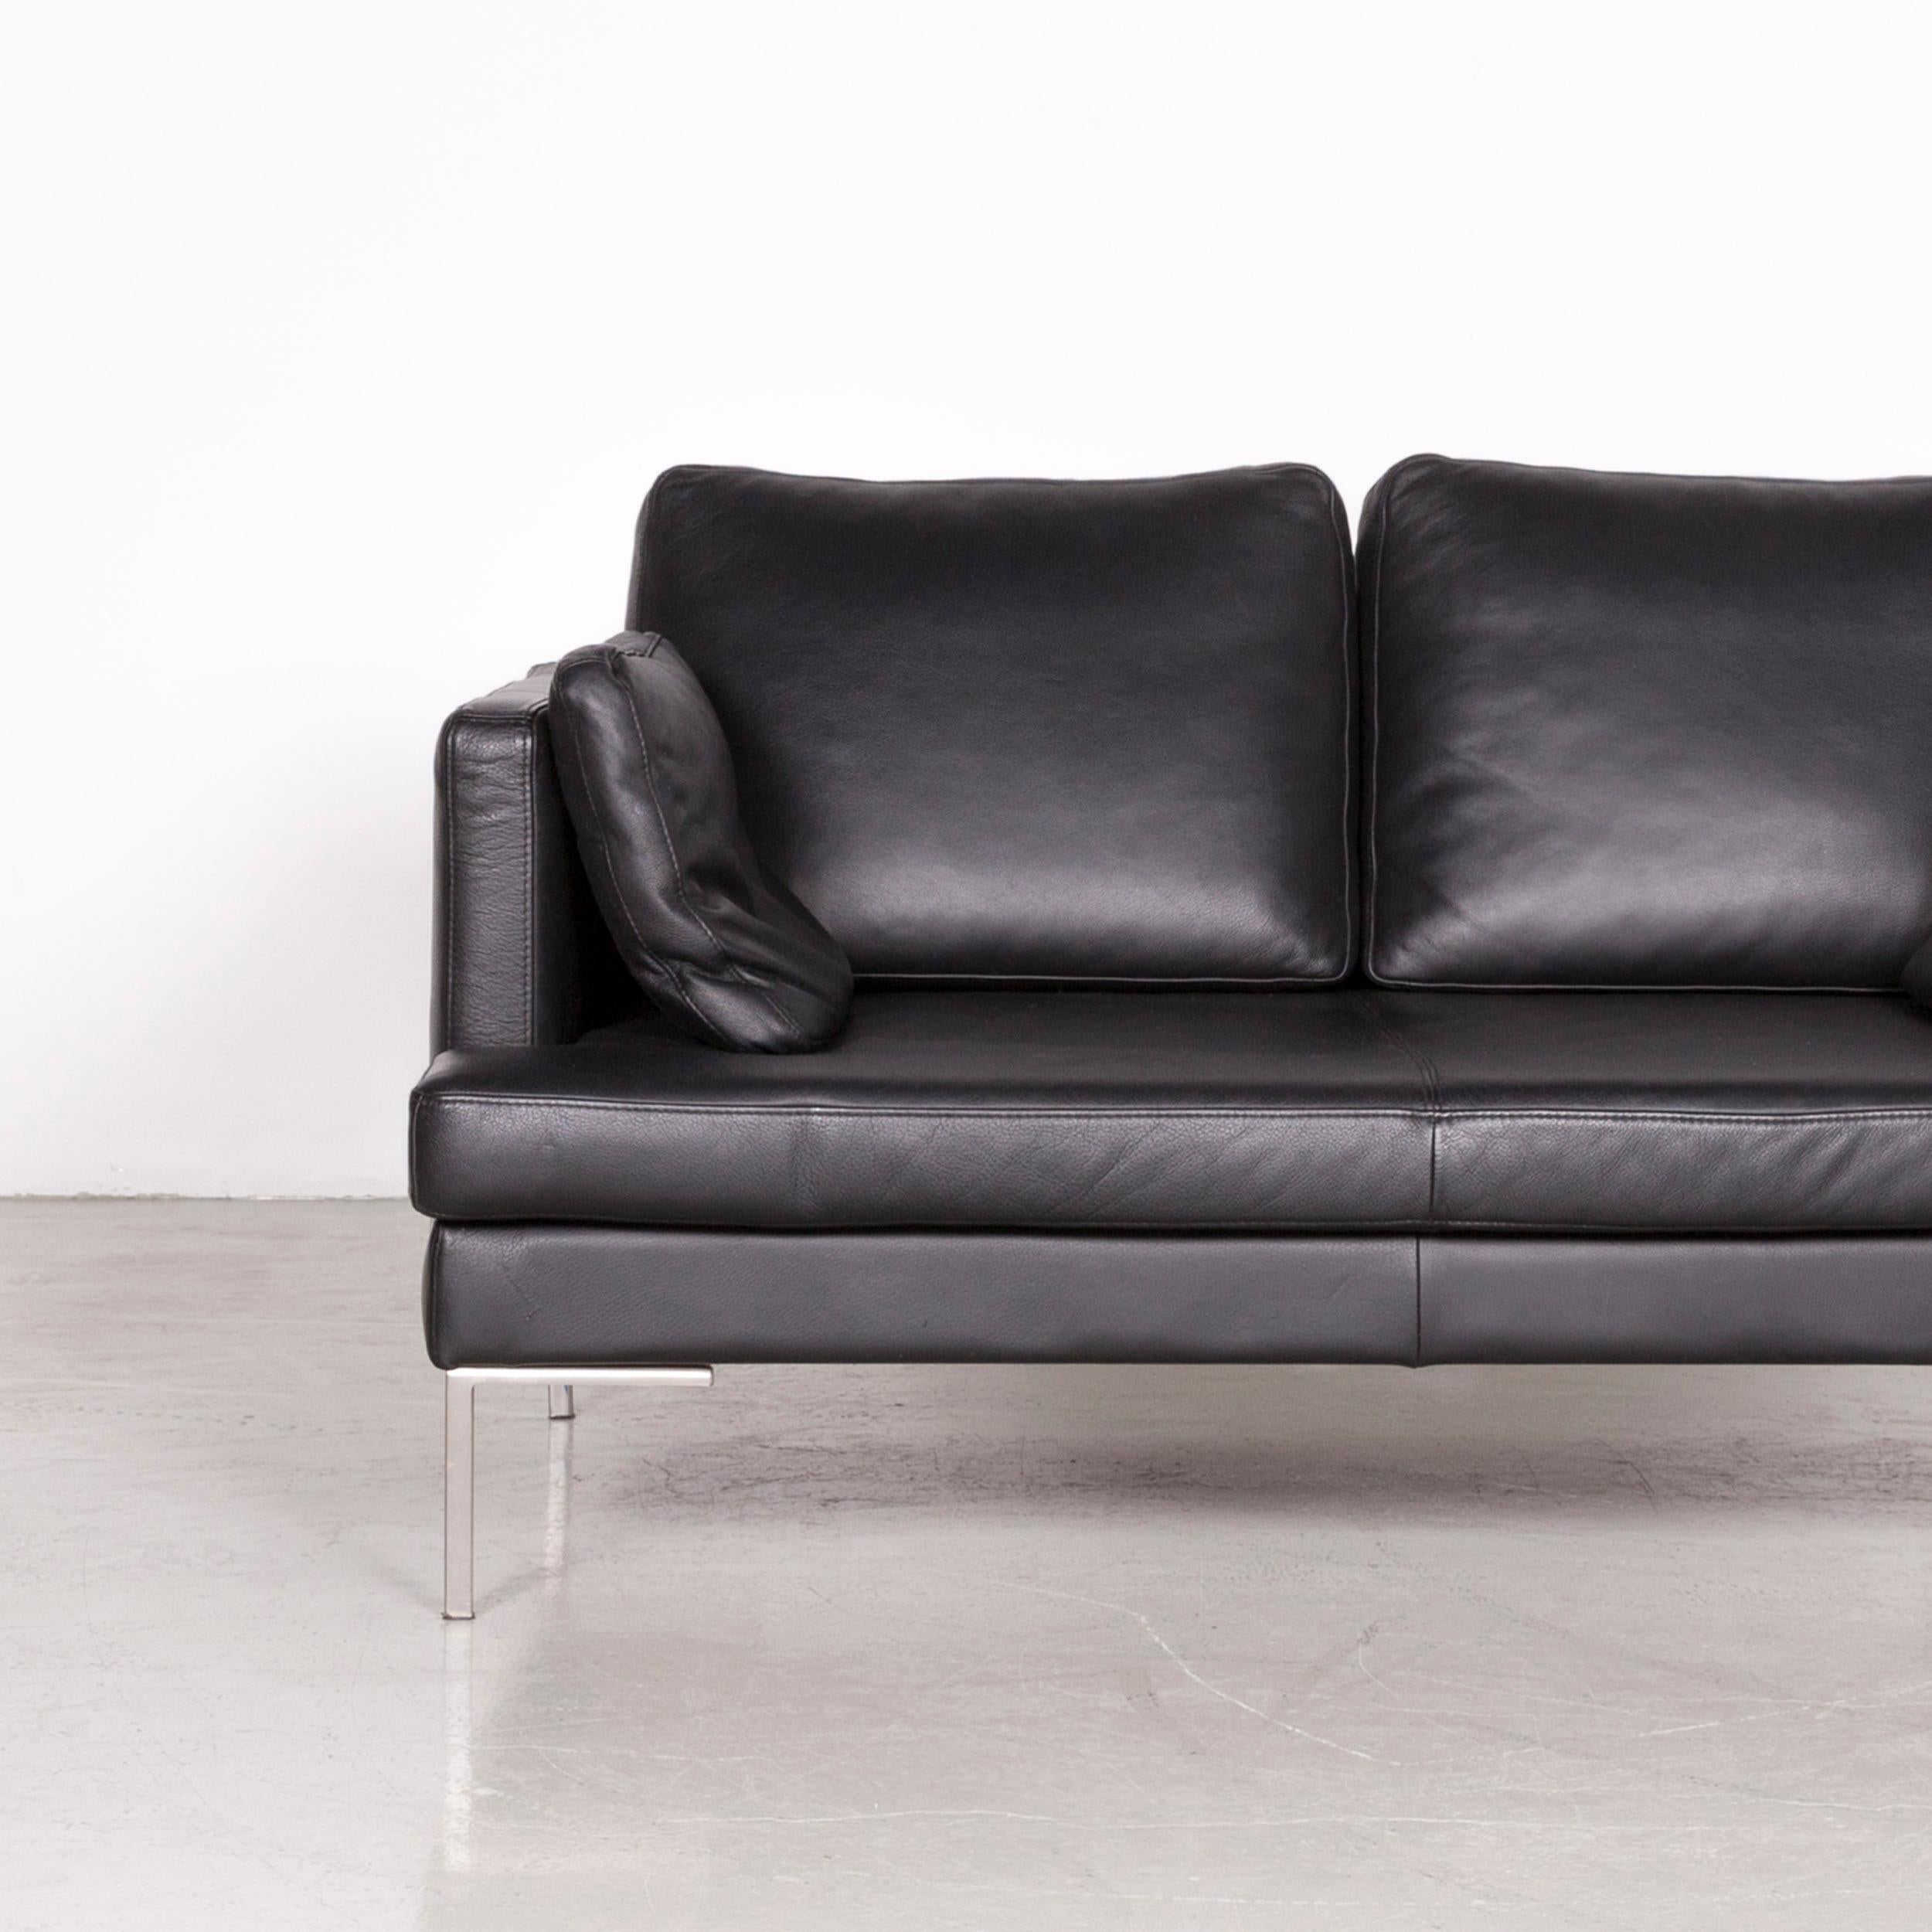 Boconcept Designer Leather Sofa Black Two-Seat Couch In Good Condition For Sale In Cologne, DE